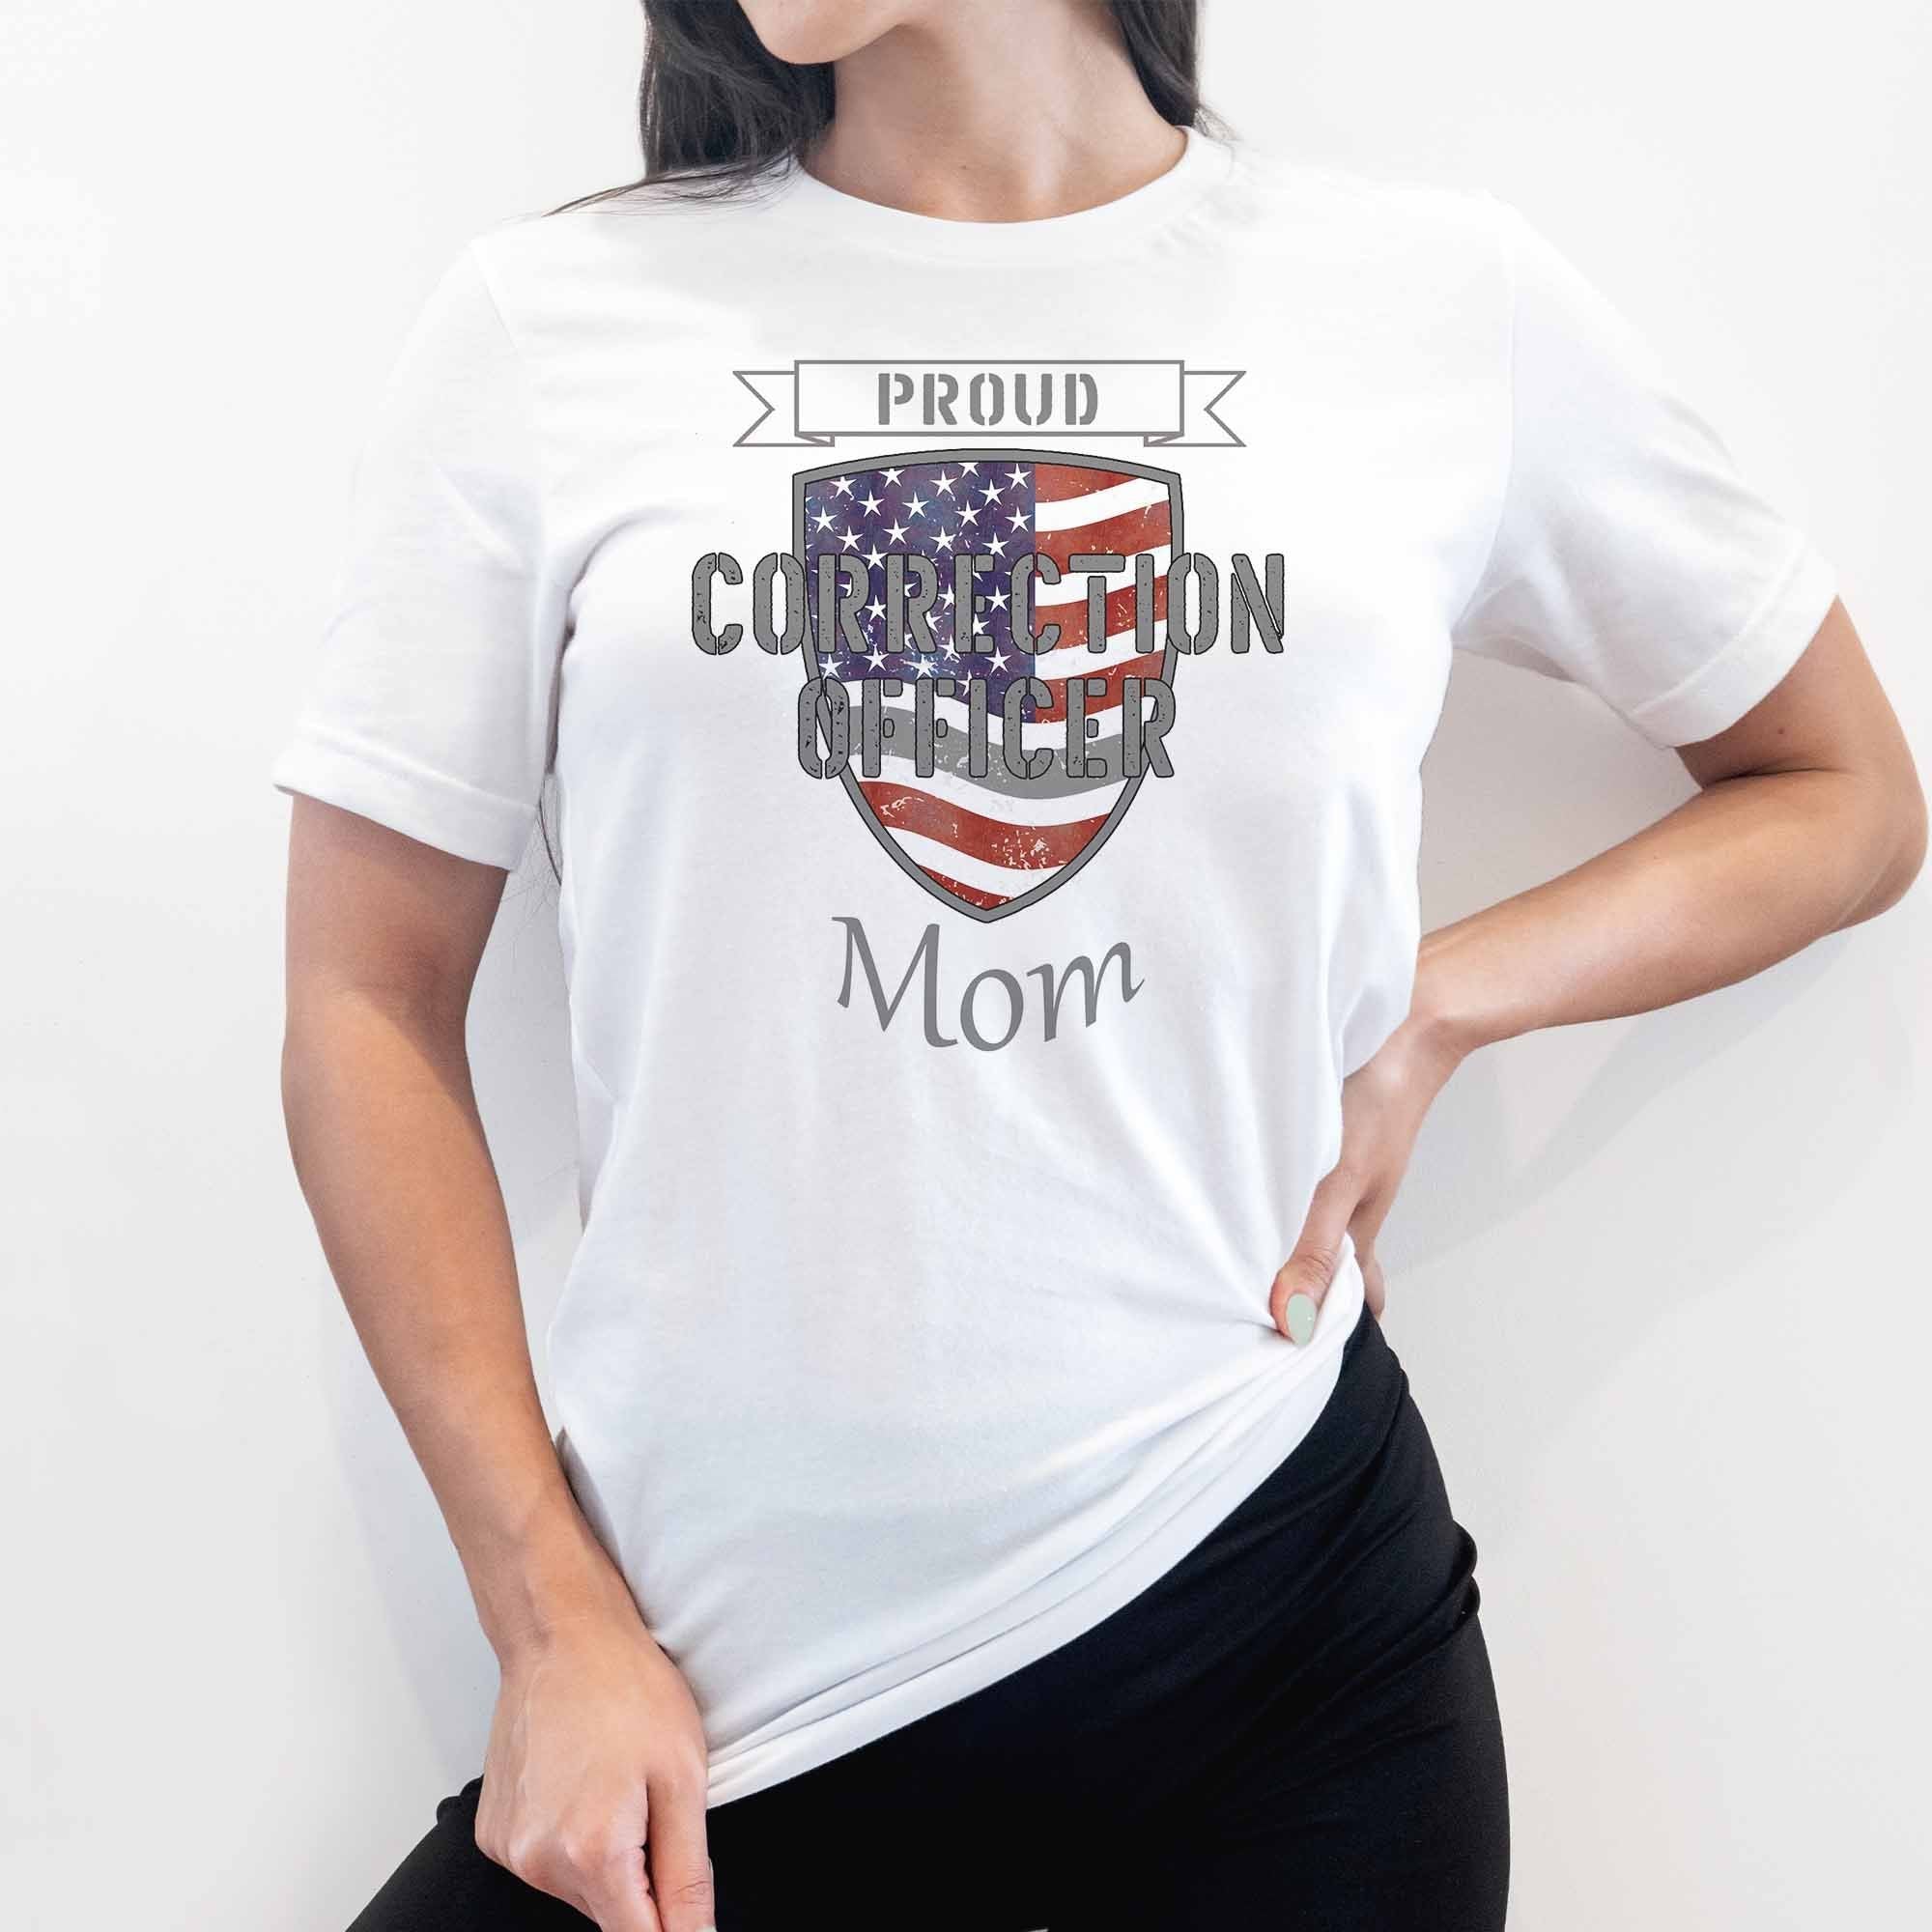 Proud Correction Officer Mom - My Custom Tee Party